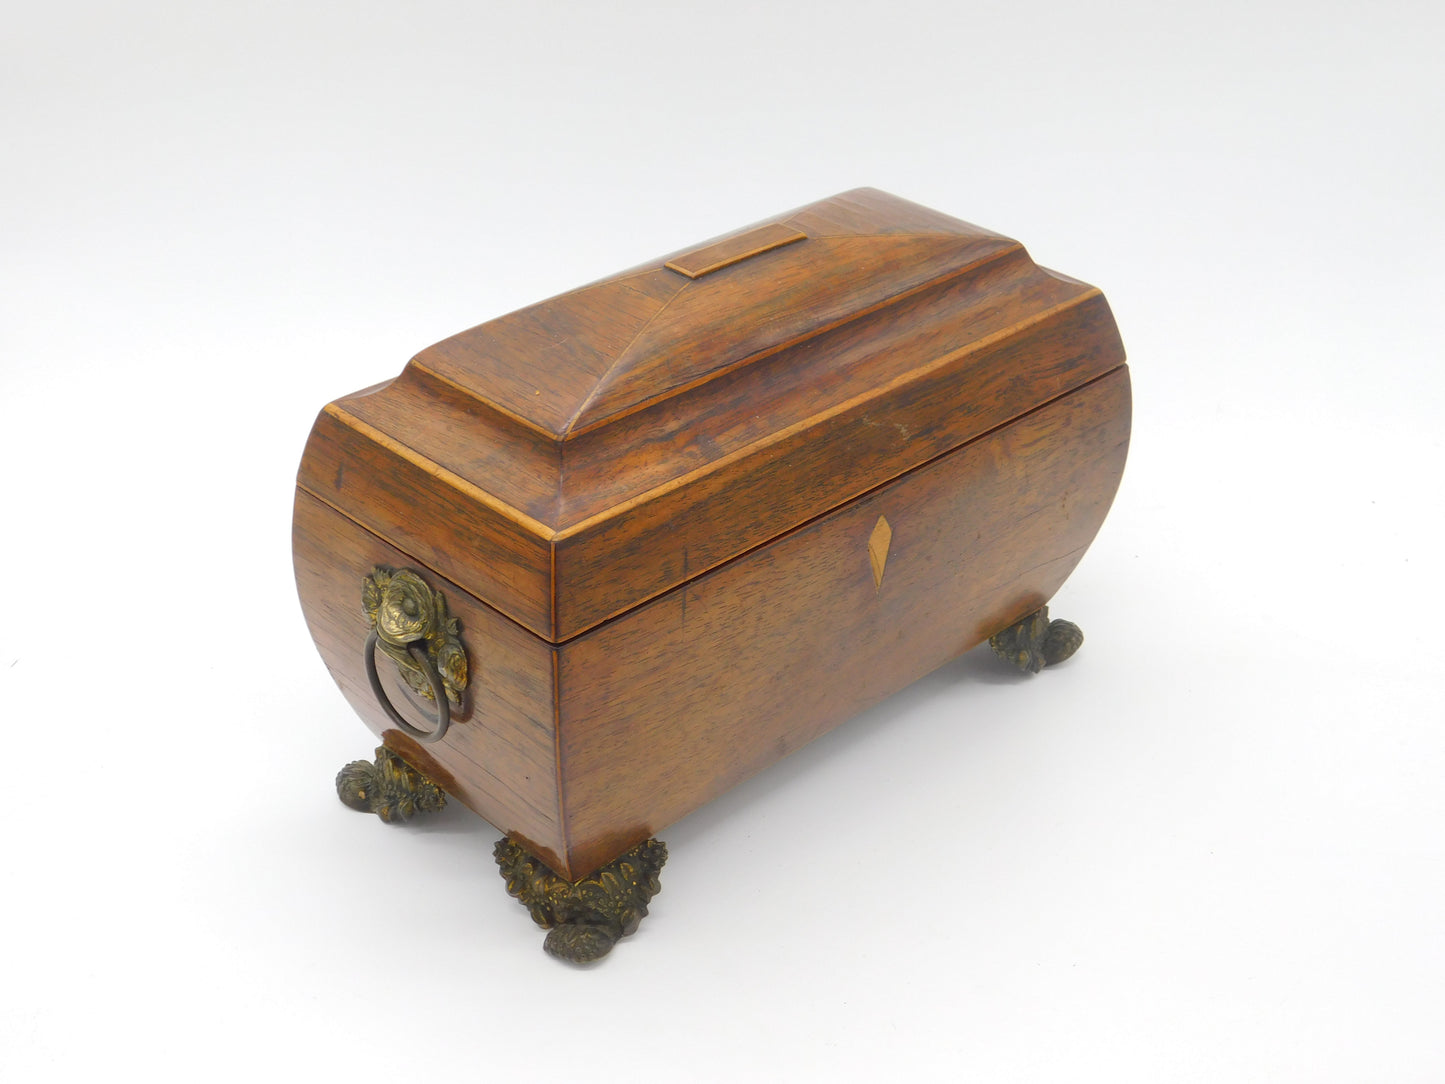 Regency Mahogany Tea Caddy with Ornate Brass Fittings & Interior c1830 Antique